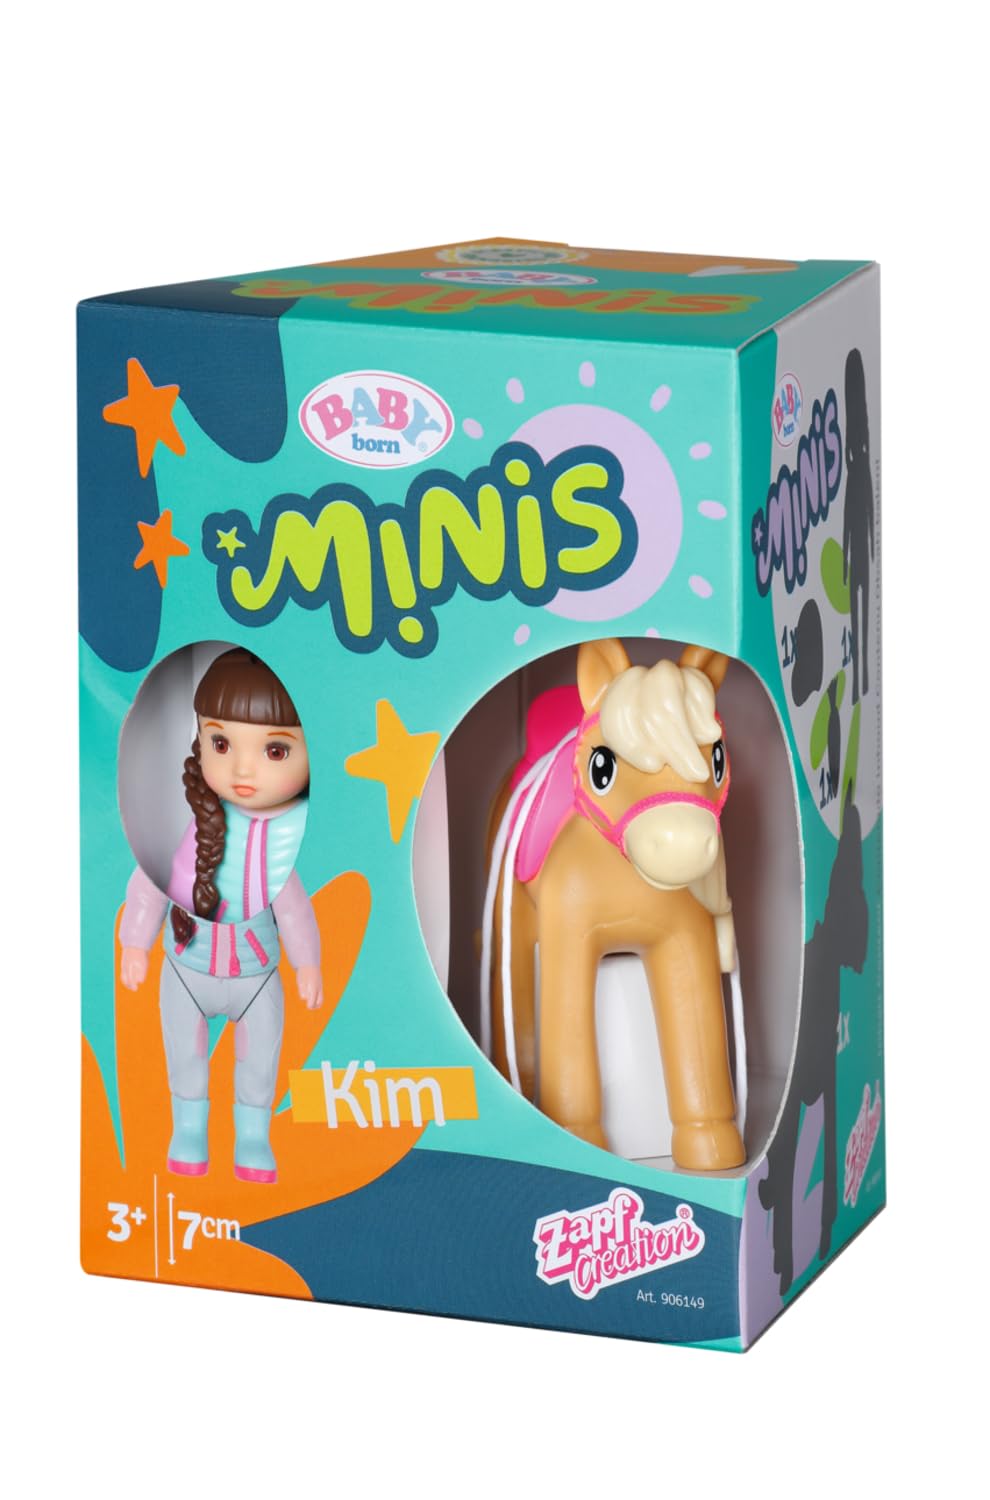 BABY born Minis Playset Horse Club Set with Kim 906149 - 7cm Doll with Exclusive Accessories and Moveable Body for Realistic Play - Suitable for Kids From 3+ Years